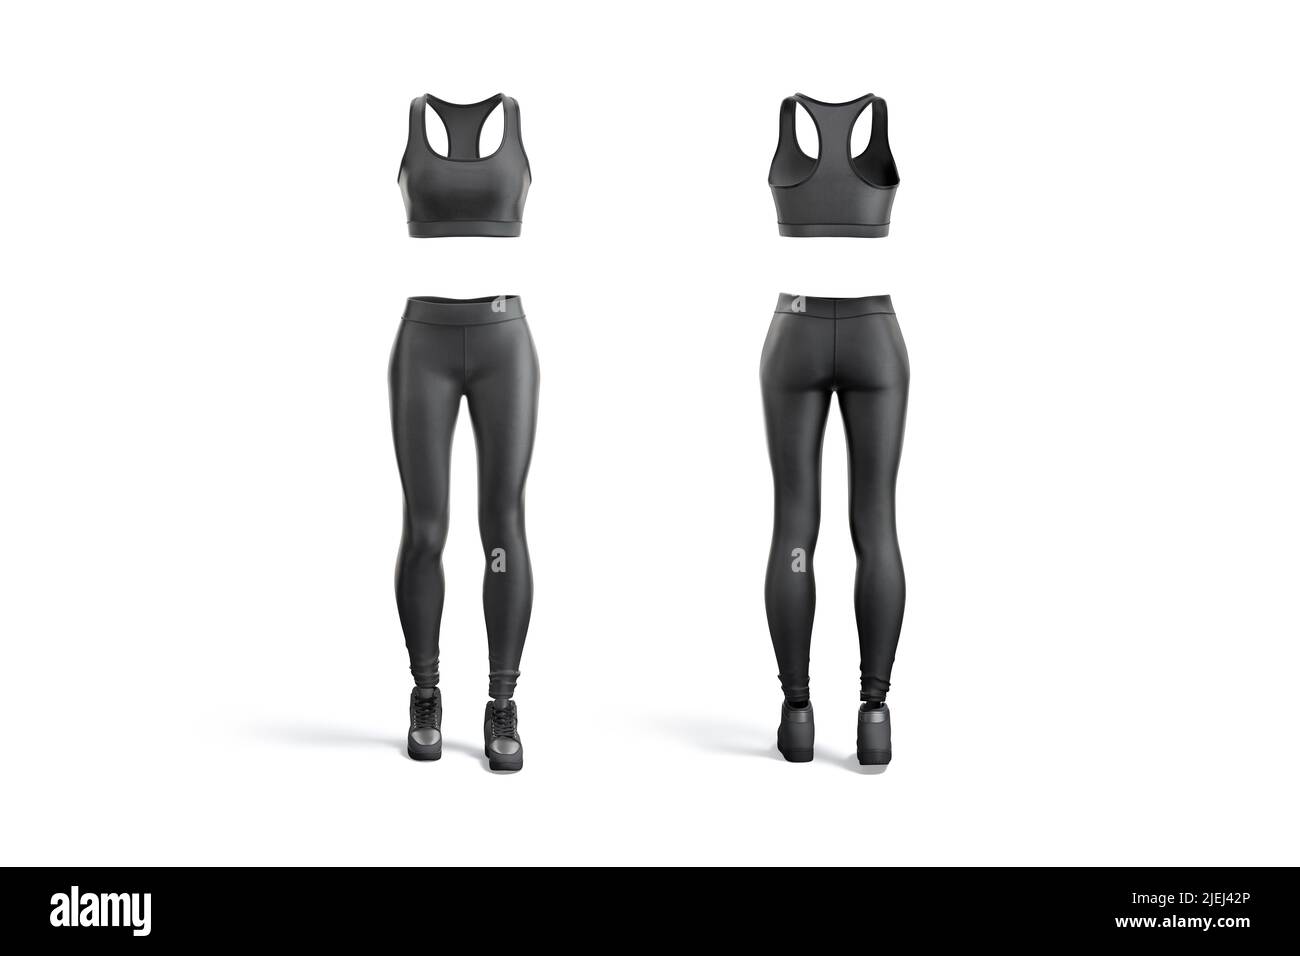 Blank black women sport uniform mockup, front and back view Stock Photo